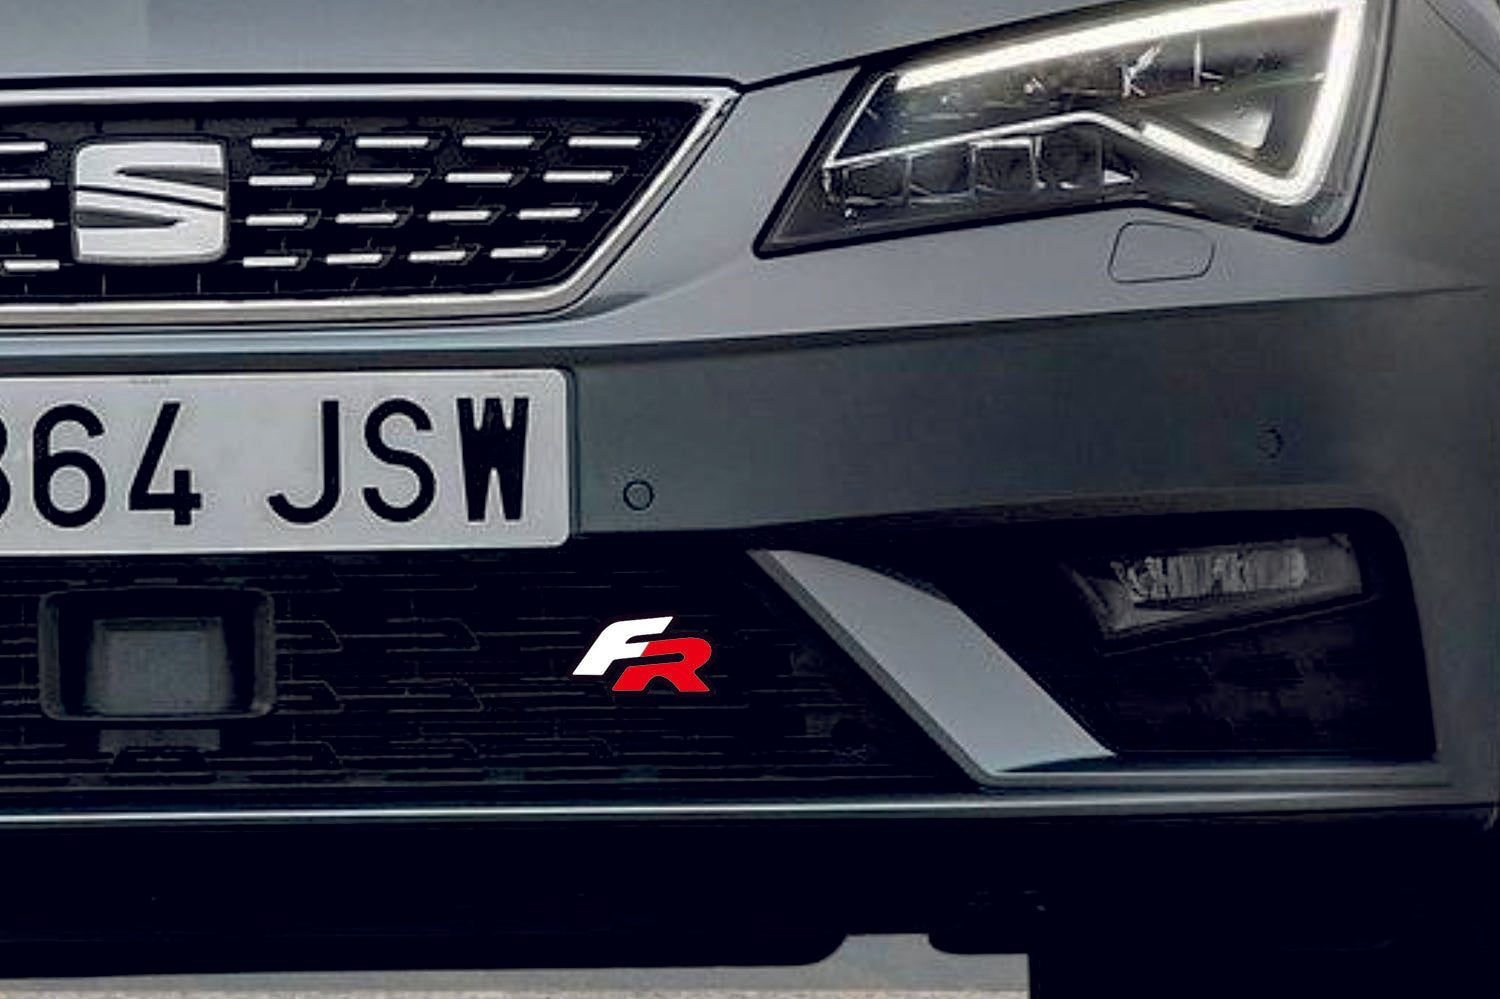 Seat radiator grille emblem with FR logo (type 2) - decoinfabric